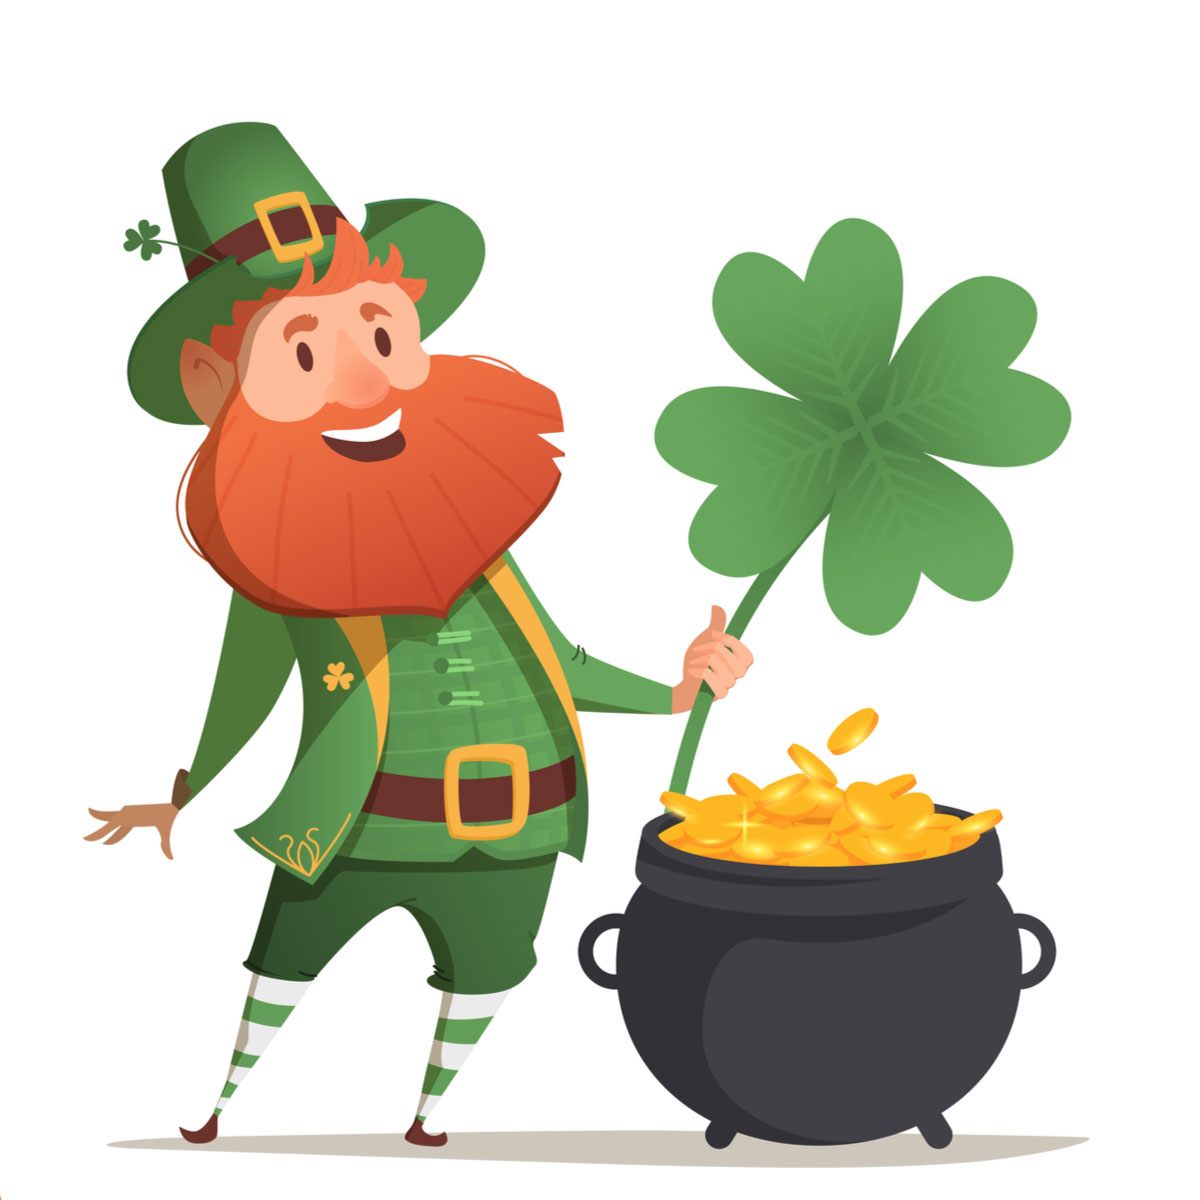 A leprechaun dressed in green with a red beard holding a four leaf clover next to his pot of gold.